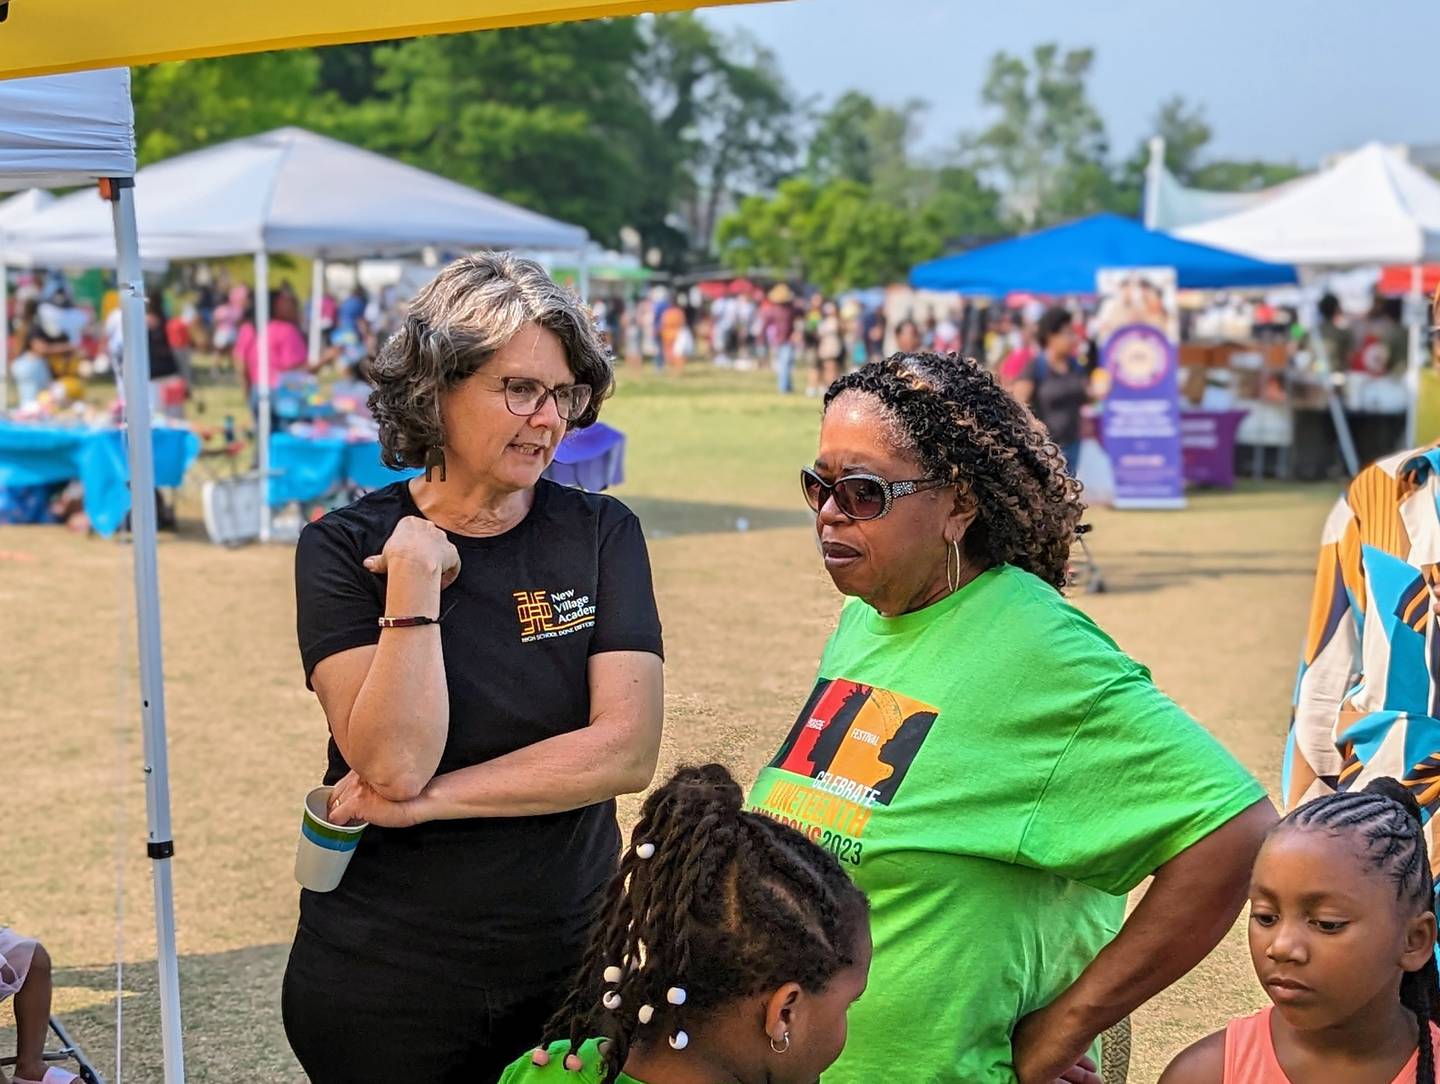 Romey Pittman, left, talks with a parent about New Village Academy, a proposed charter school in Annapolis, during the Juneteenth festival on Saturday.